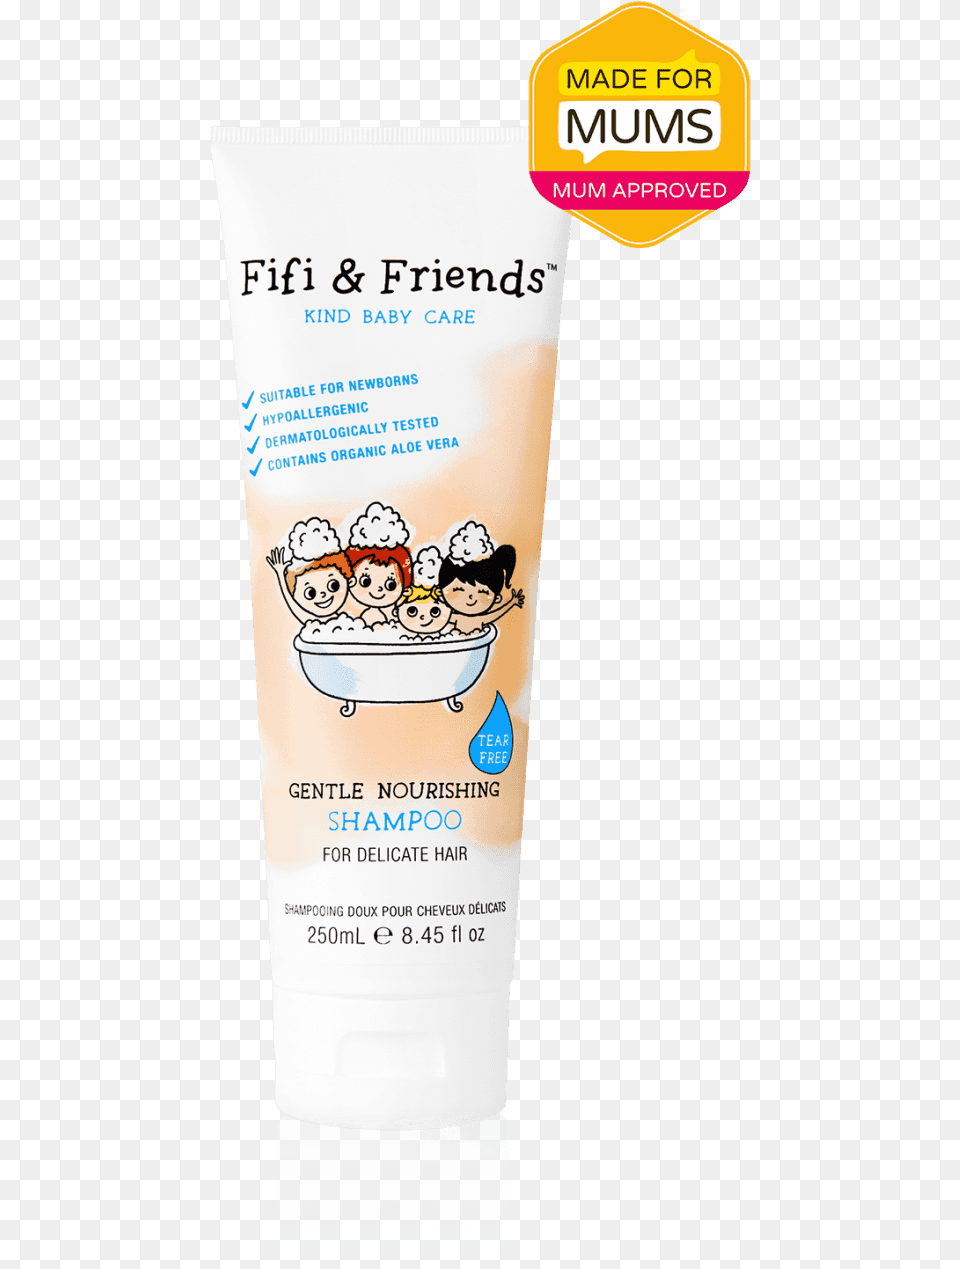 Flyer, Bottle, Cosmetics, Sunscreen, Lotion Free Png Download